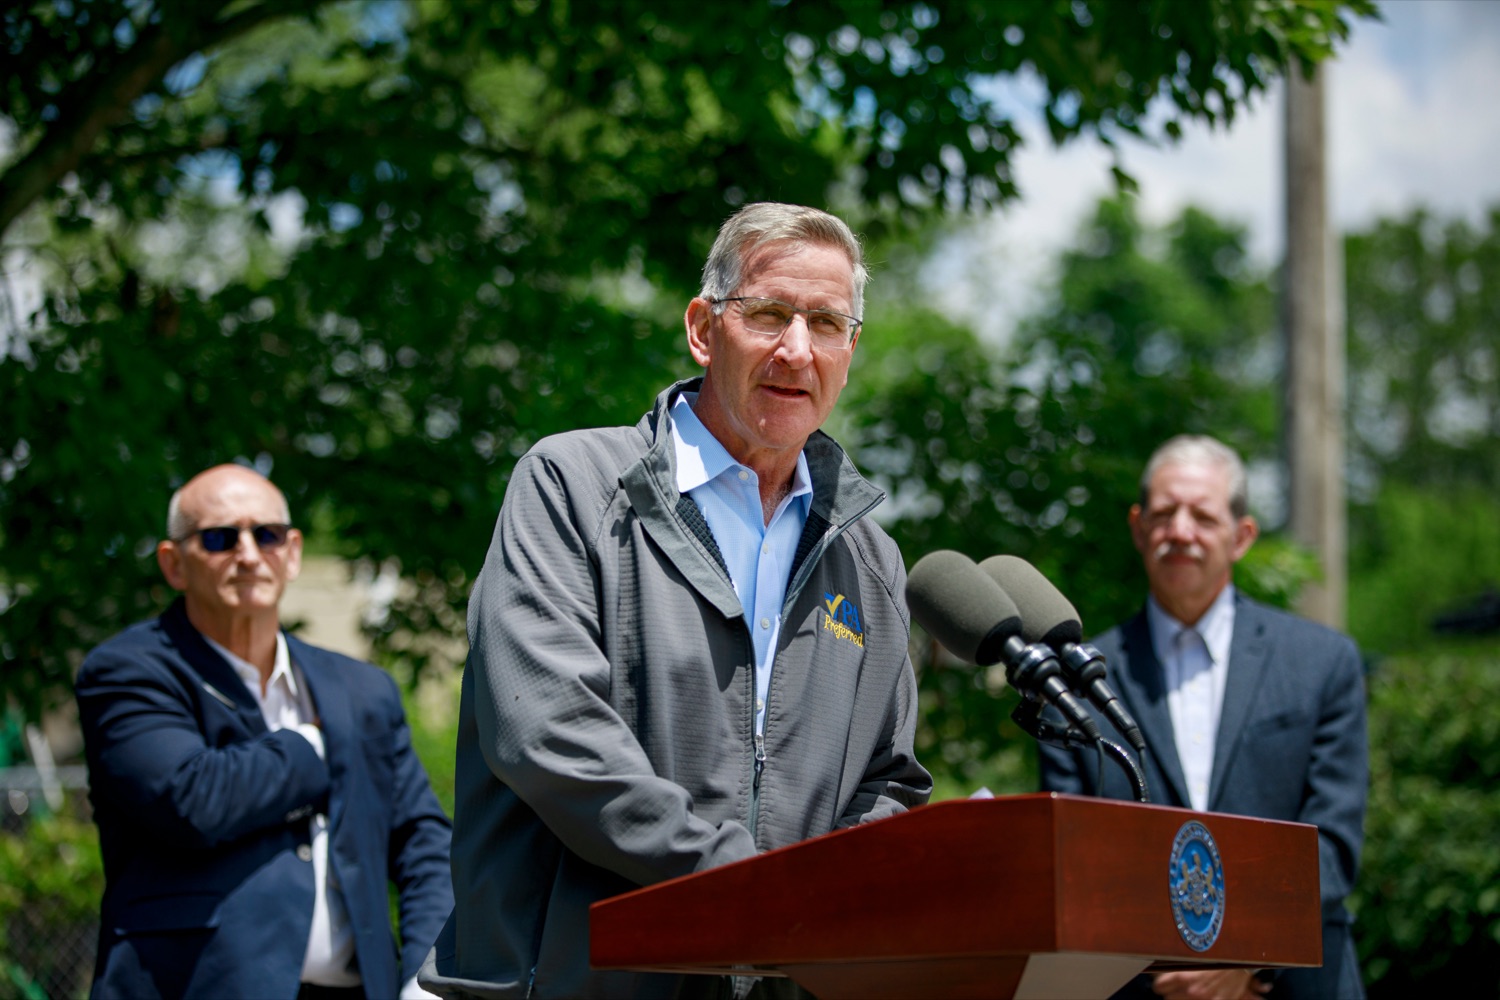 Dept. of Agriculture Secretary Russell Redding speaks during a press conference, which provided an update on the state of spotted lanternfly in Pennsylvania and the path to beating this invasive specie, at Eichenlaub Inc. in Allegheny County, on Tuesday, June 22, 2021.<br><a href="https://filesource.amperwave.net/commonwealthofpa/photo/18842_AGRIC_SLF_NK_016.jpg" target="_blank">⇣ Download Photo</a>